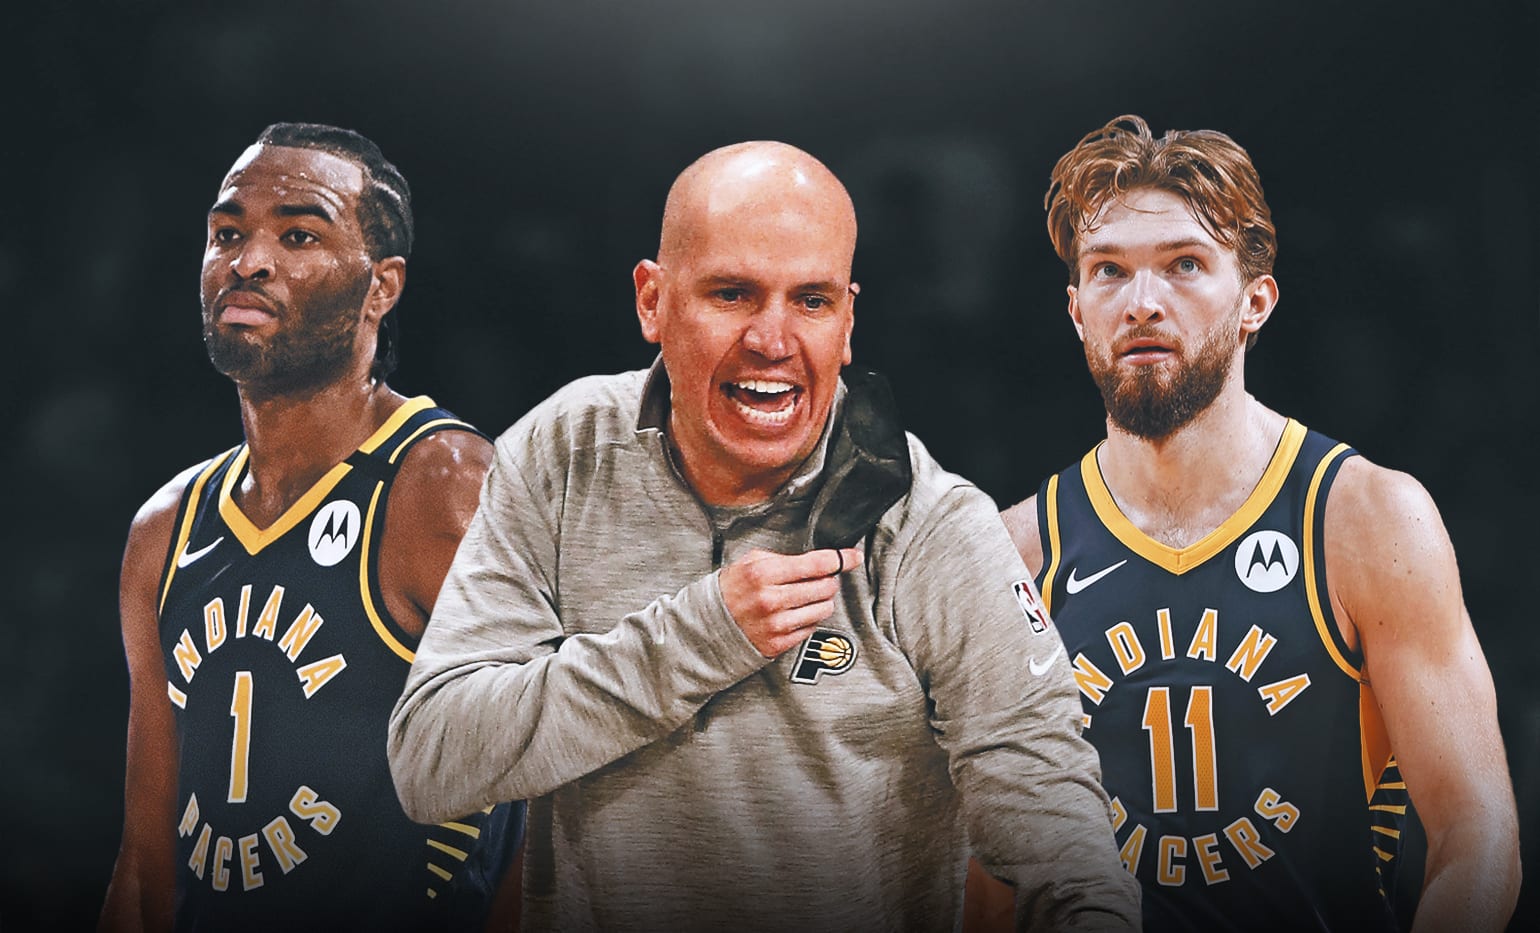 The Indiana Pacers Have Descended Into Chaos Behind the Scenes – Report